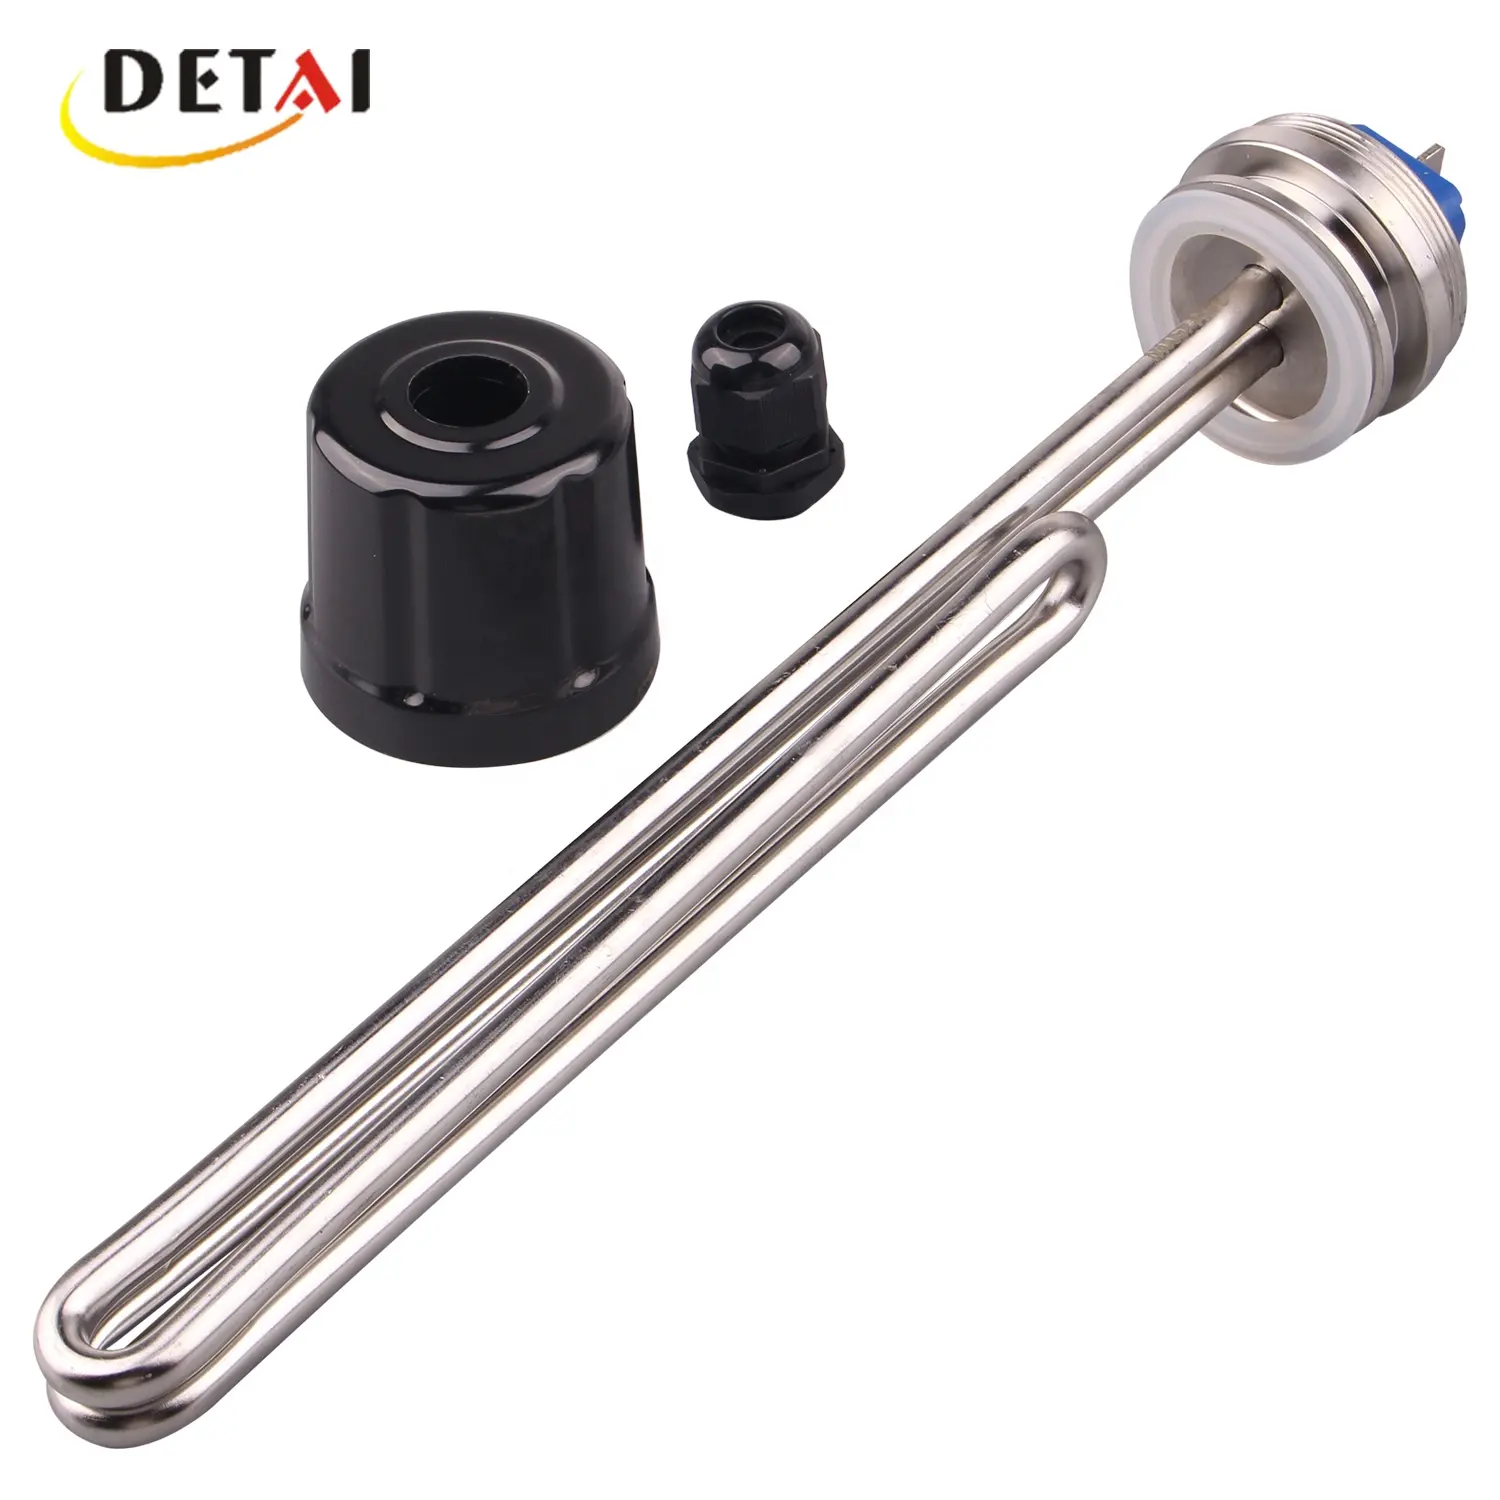 Stainless steel water electric heaters 1.5 Tri-clamp 240V 4.5KW Electric Water Heater Element Immersion Heating Element